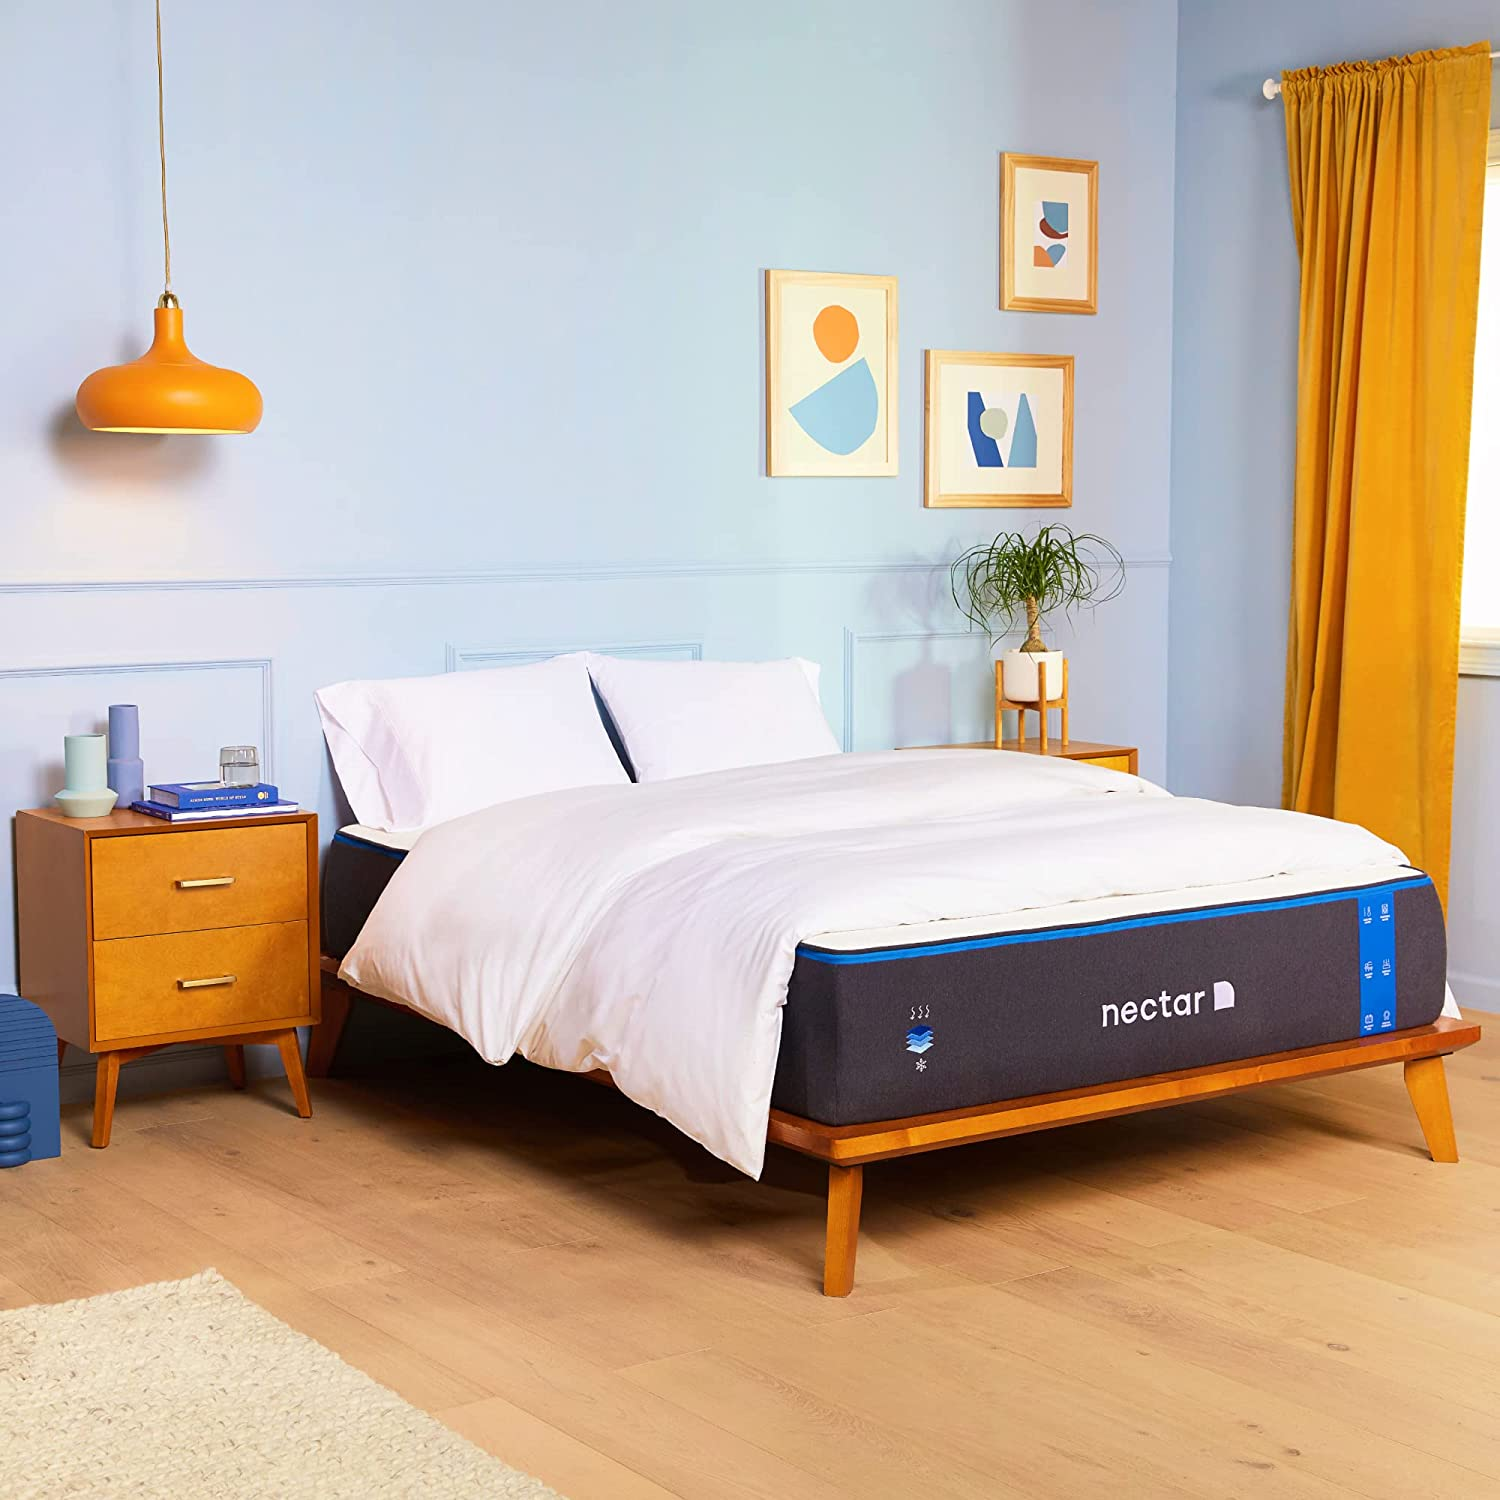 This mattress provides maximum comfort with a great warranty offer.